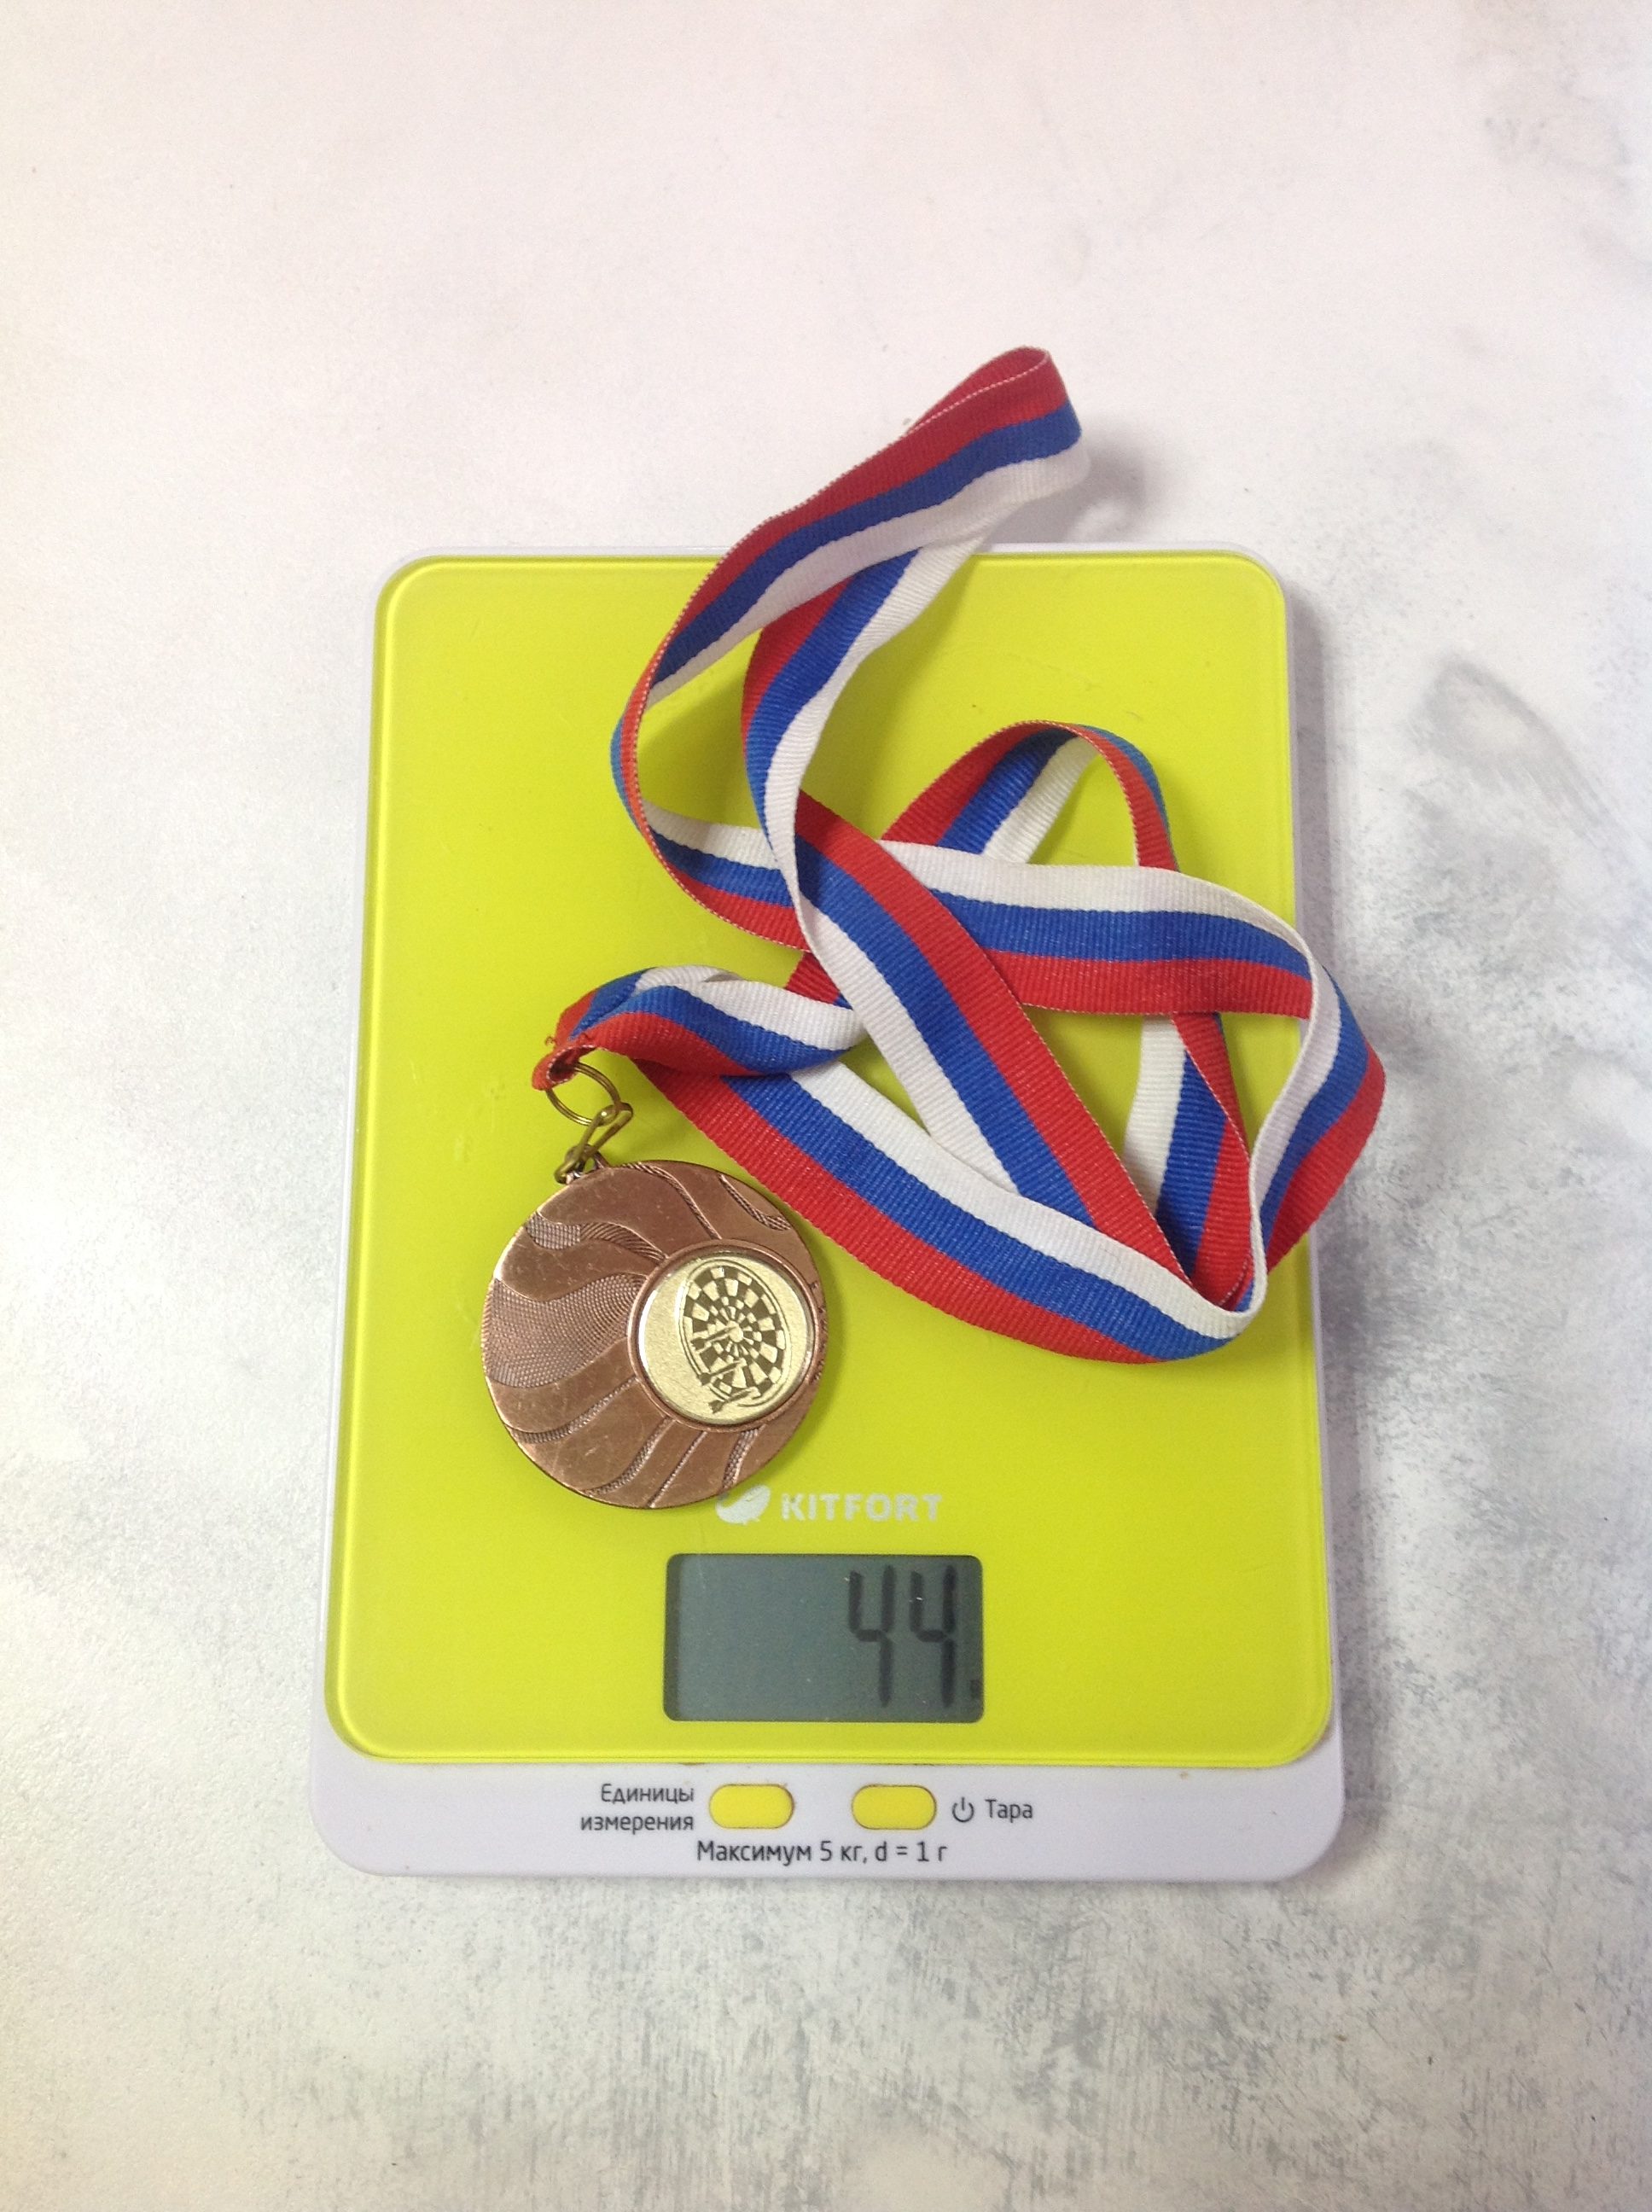 How much does a sports medal weigh?